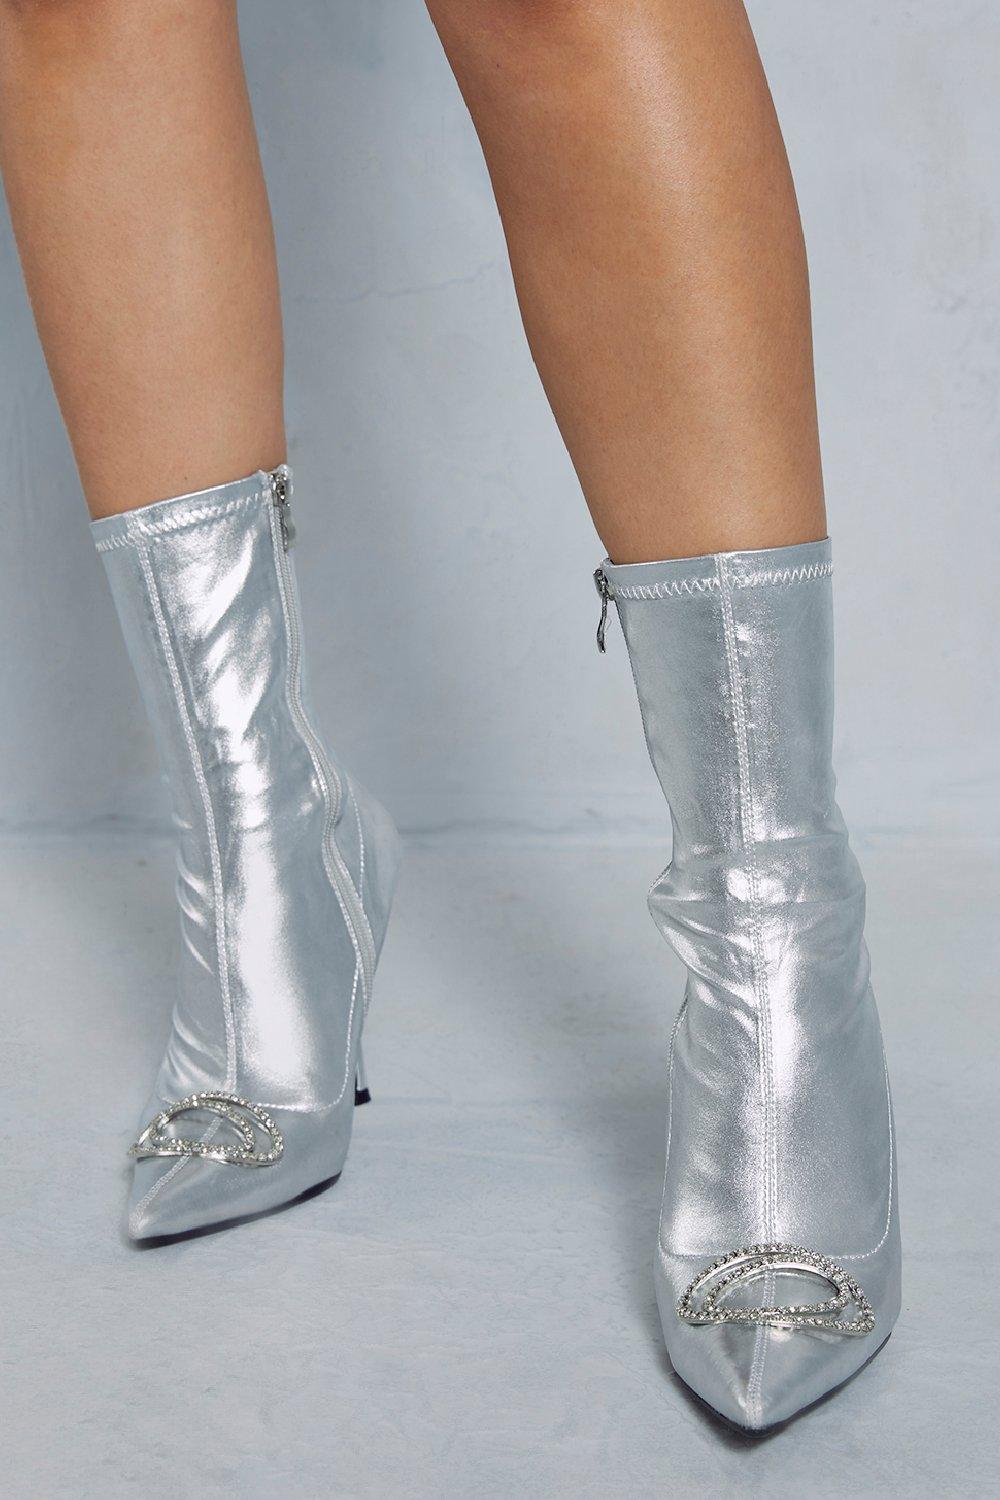 Womens Diamante Buckle Ankle Boots - silver - 6, Silver